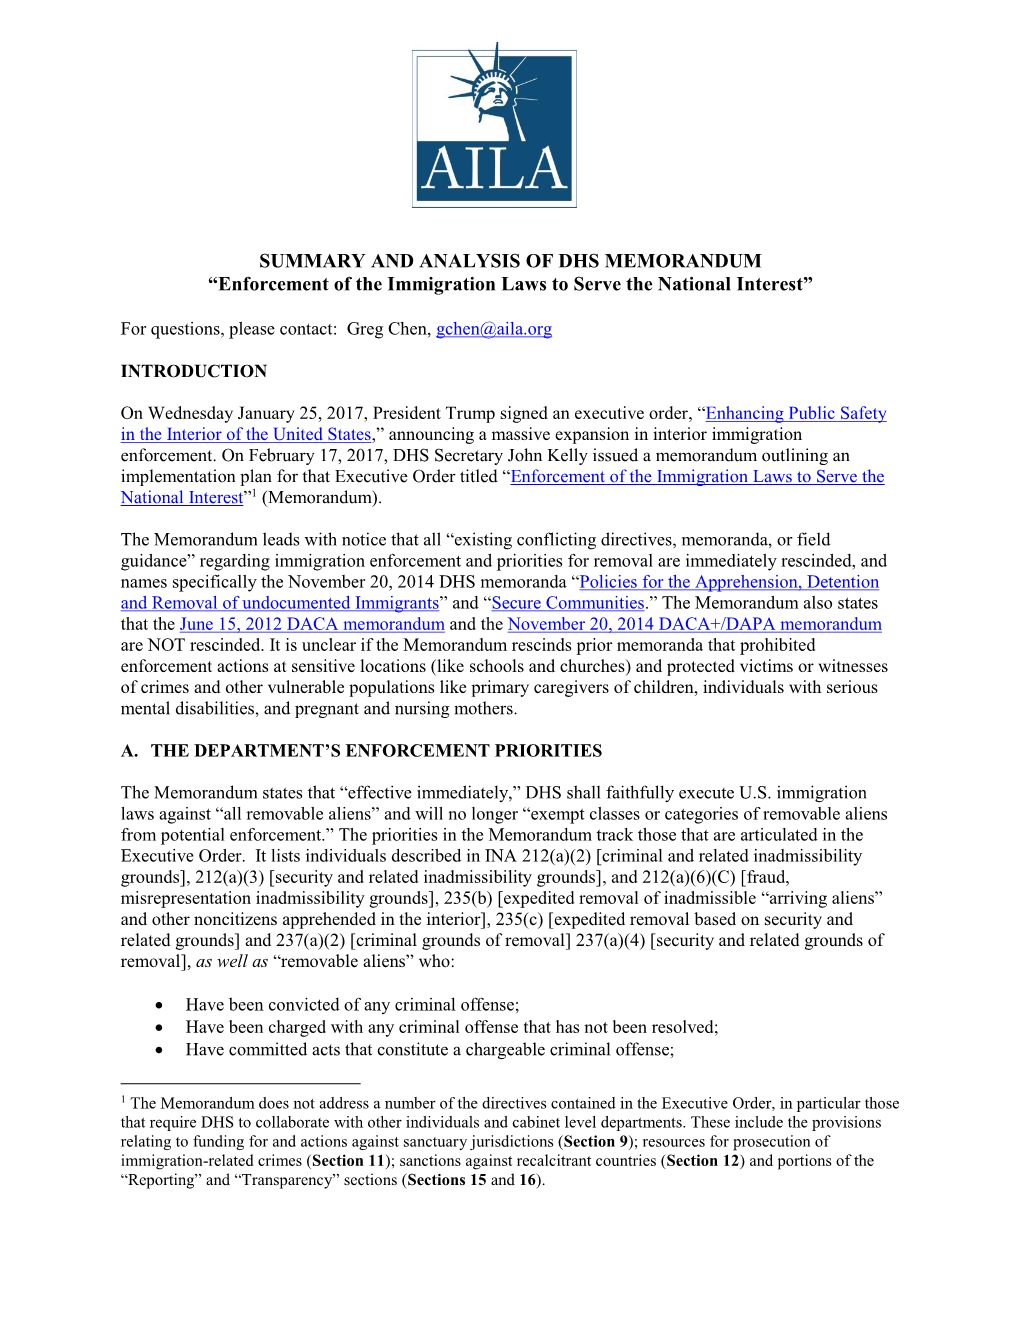 AILA Summary of DHS Interior Enforcement Memo